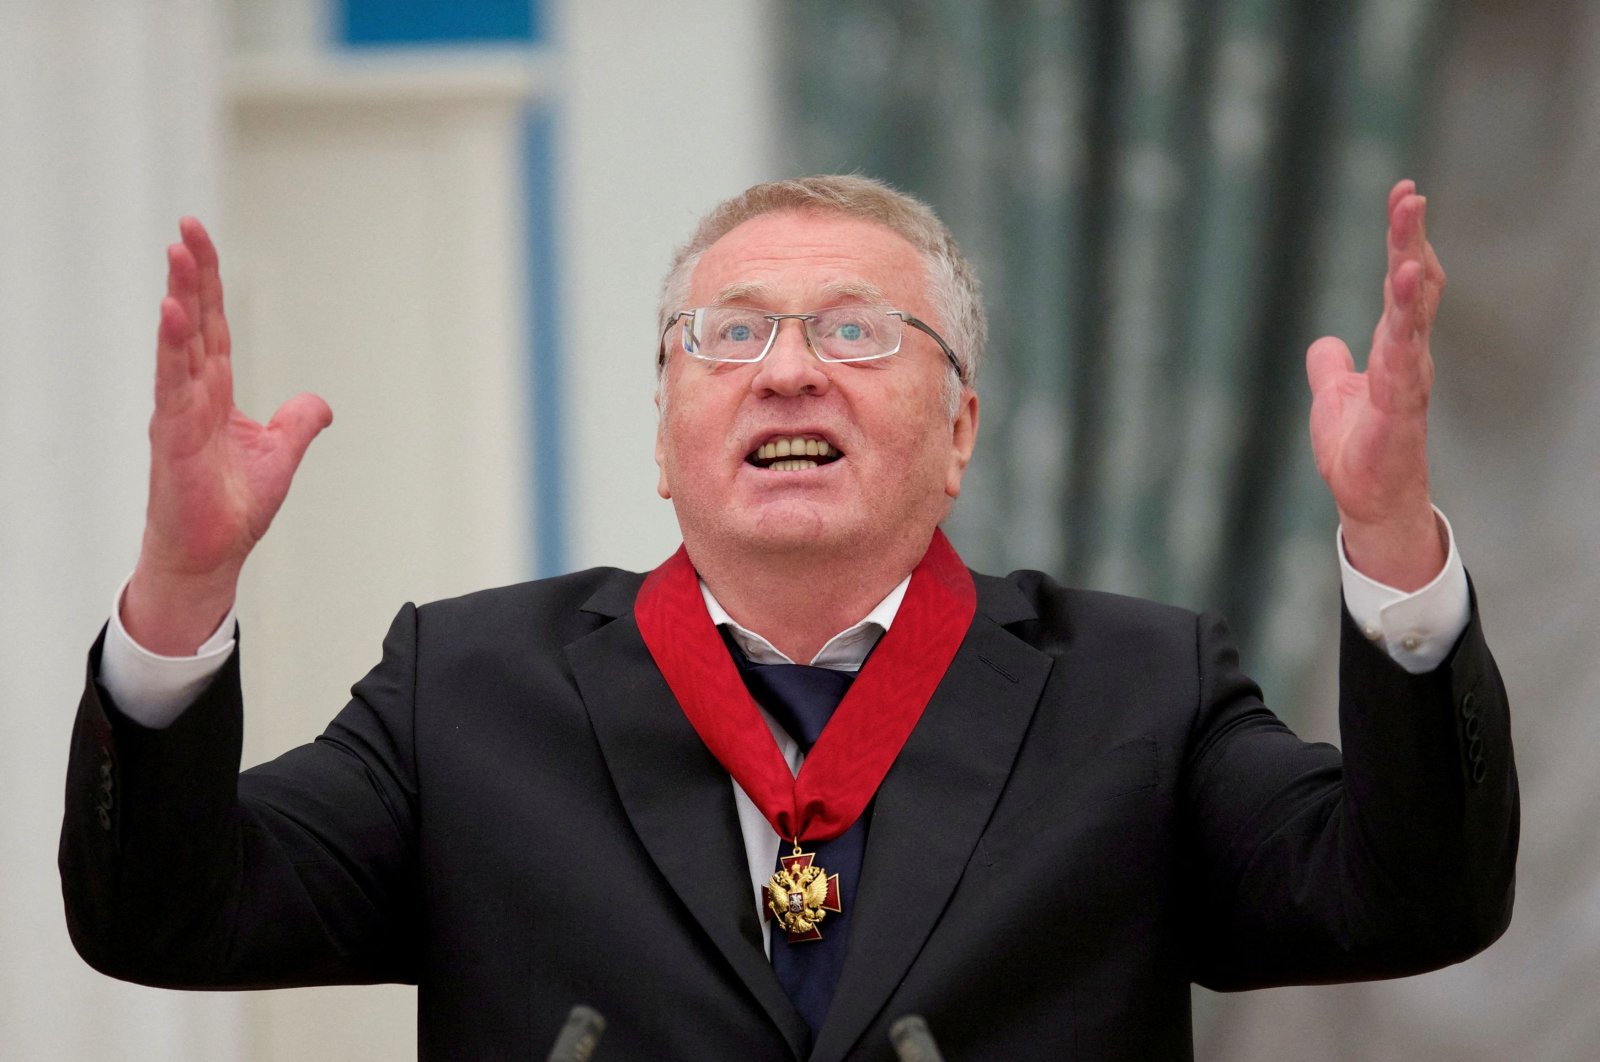 Russian Liberal Democratic Party leader Vladimir Zhirinovsky delivers a speech after receiving an award from President Vladimir Putin during a ceremony at the Kremlin in Moscow, Russia, Sept. 22, 2016. (Reuters File Photo)